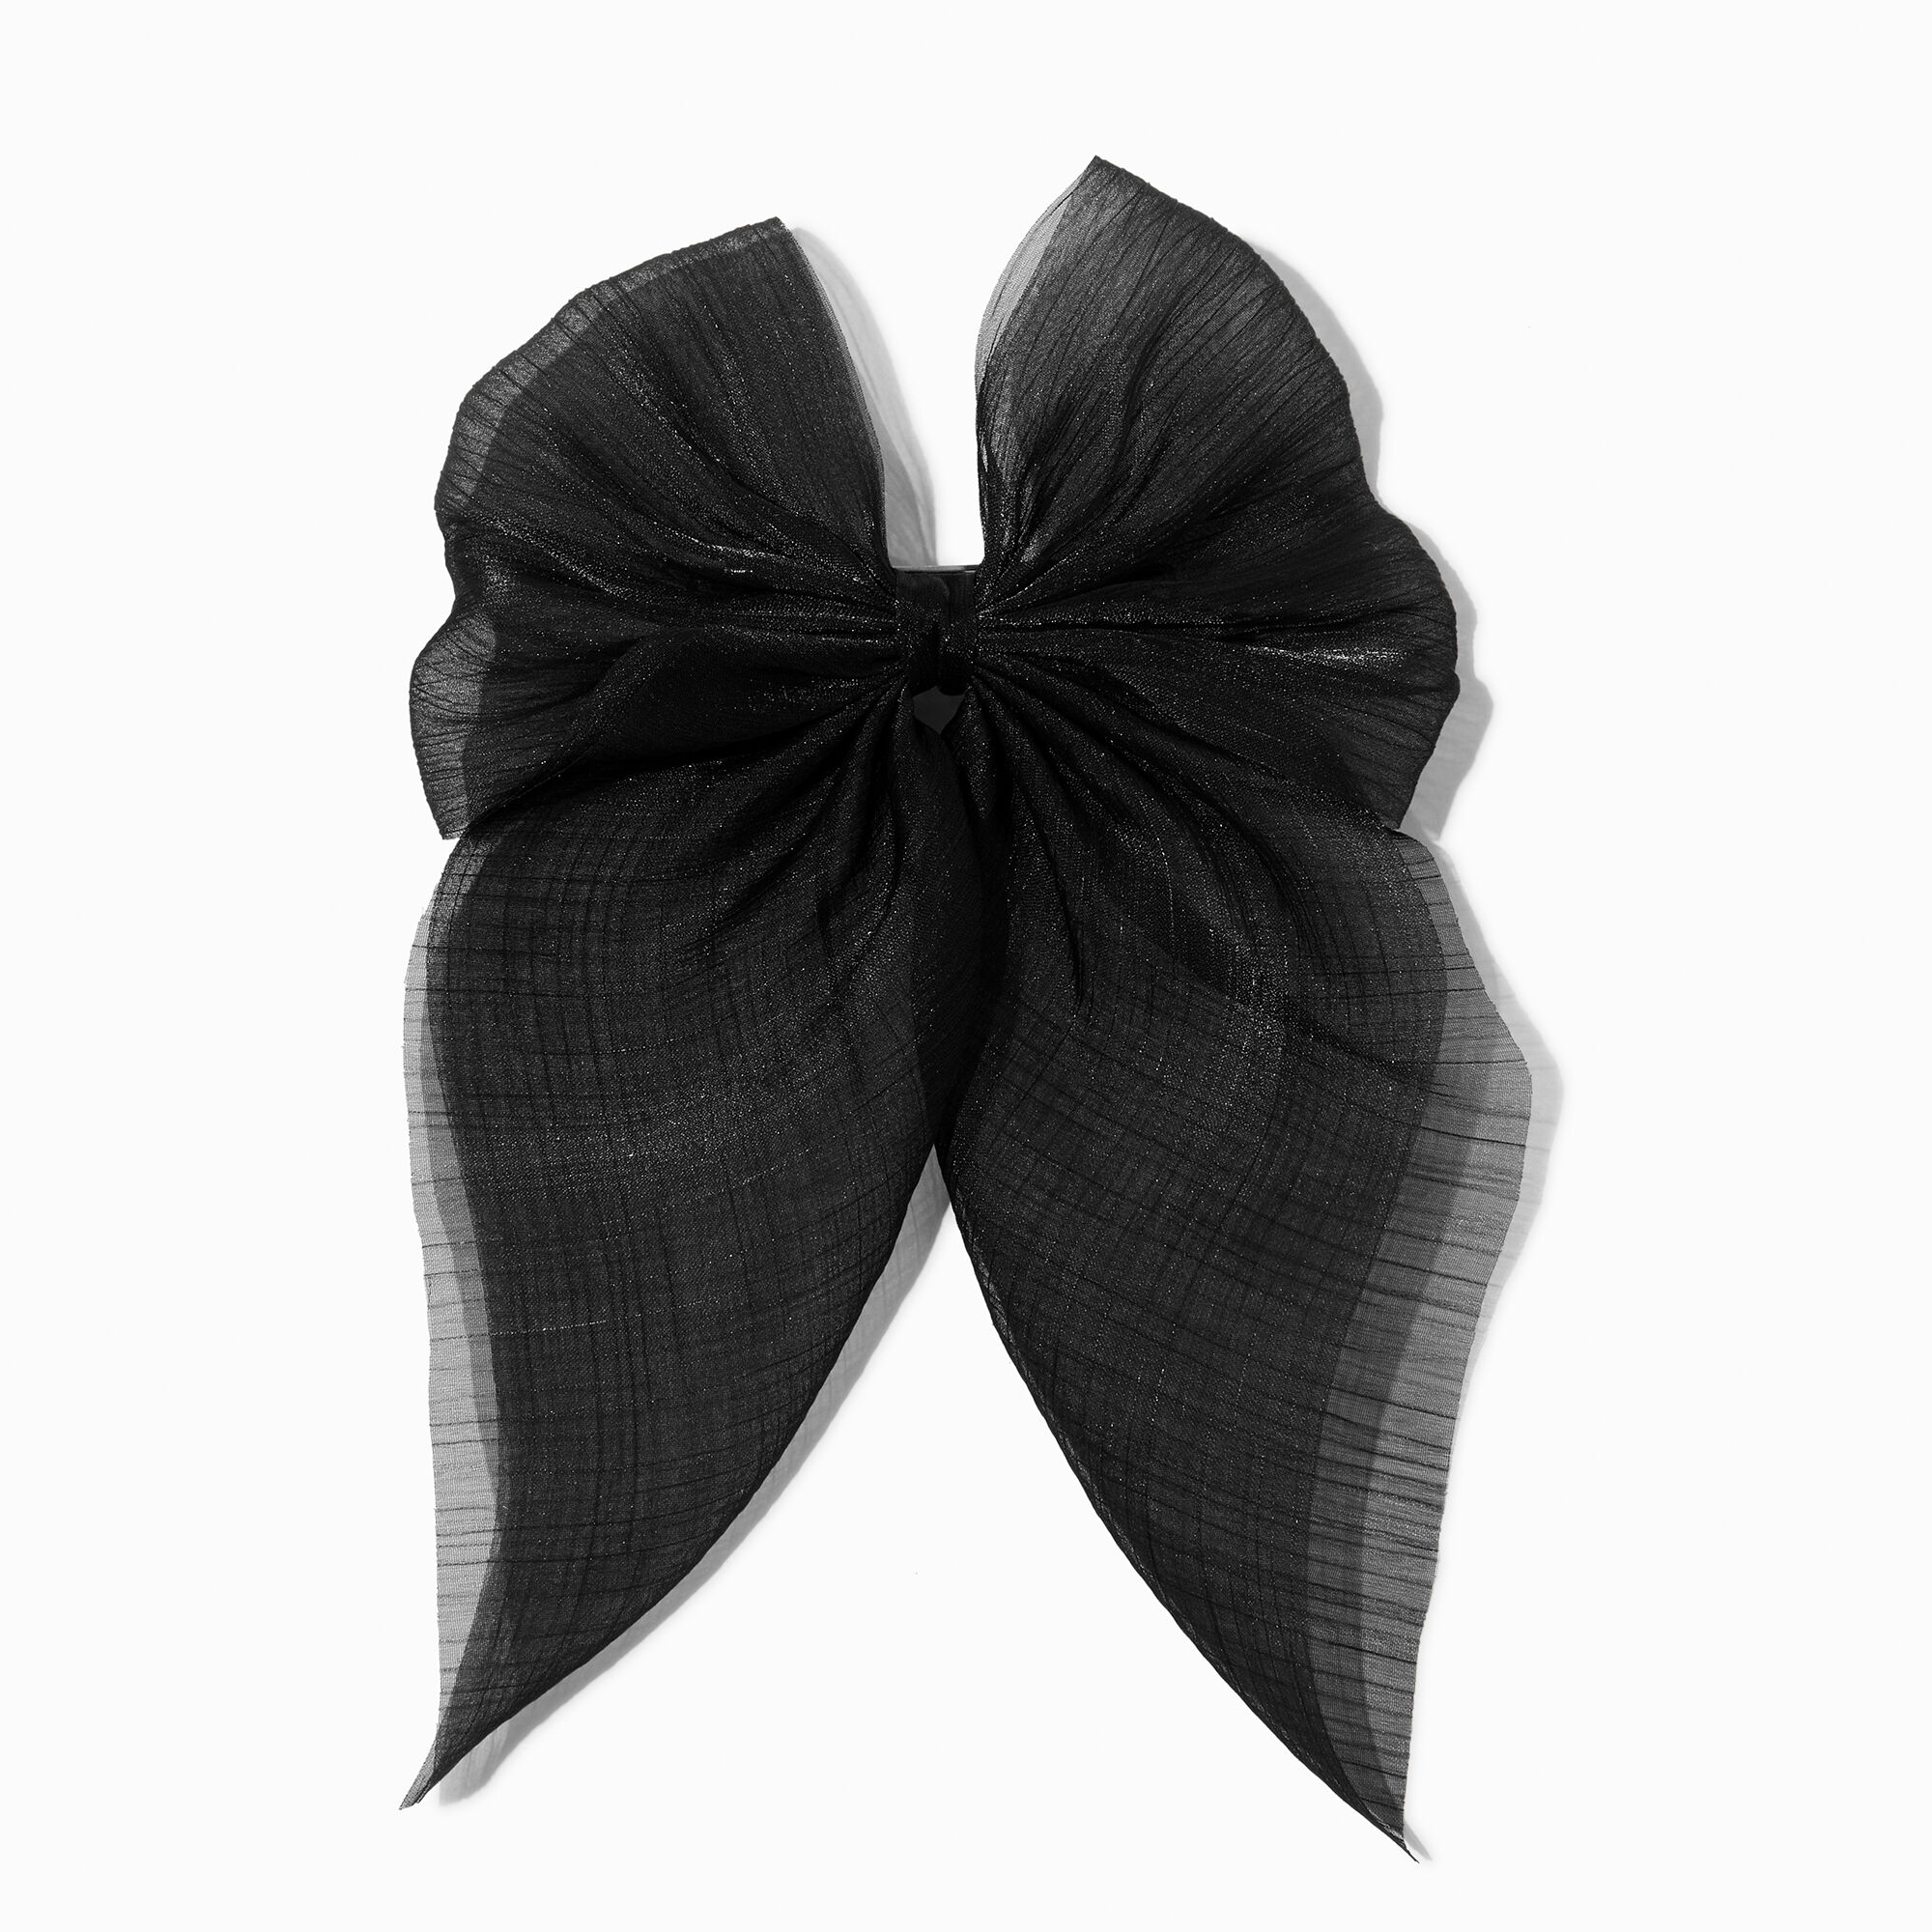 View Claires Sheer Bow Hair Clip Black information